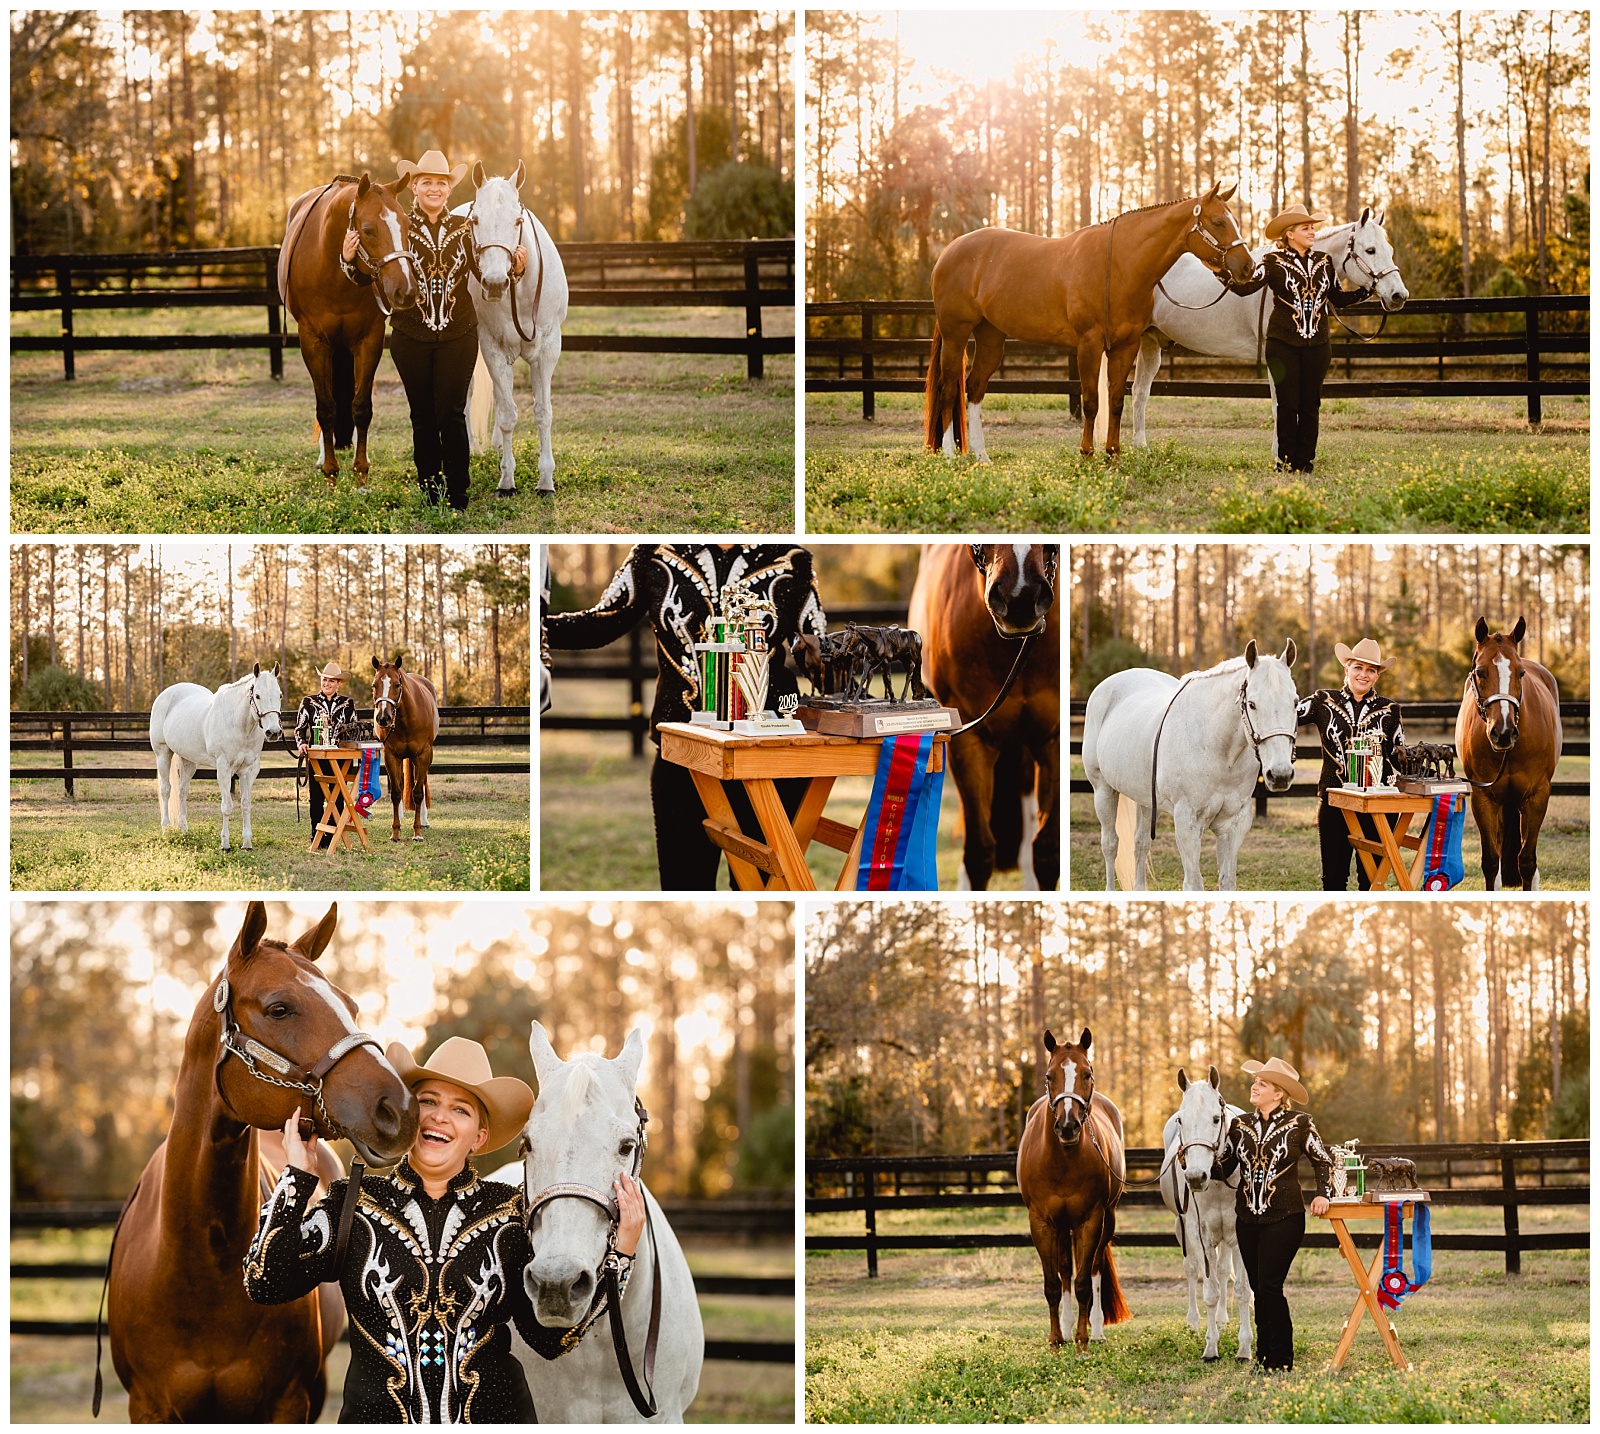 Western pleasure show horses with their rider in showmanship jacket and trophies. Florida equine photographer.